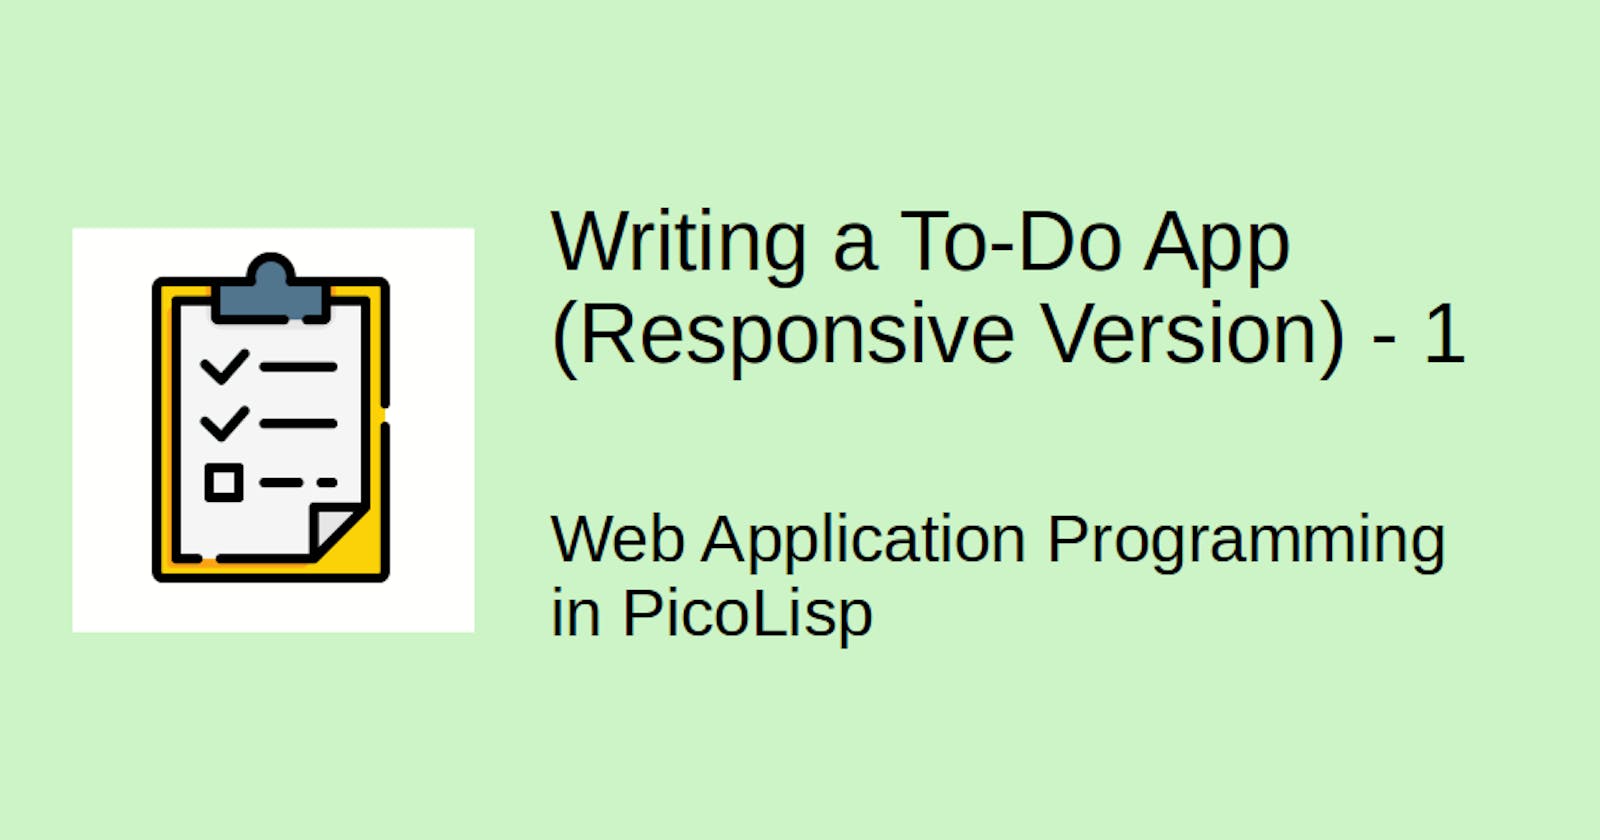 How to create a To-Do App in PicoLisp (Responsive Version) - Part 1